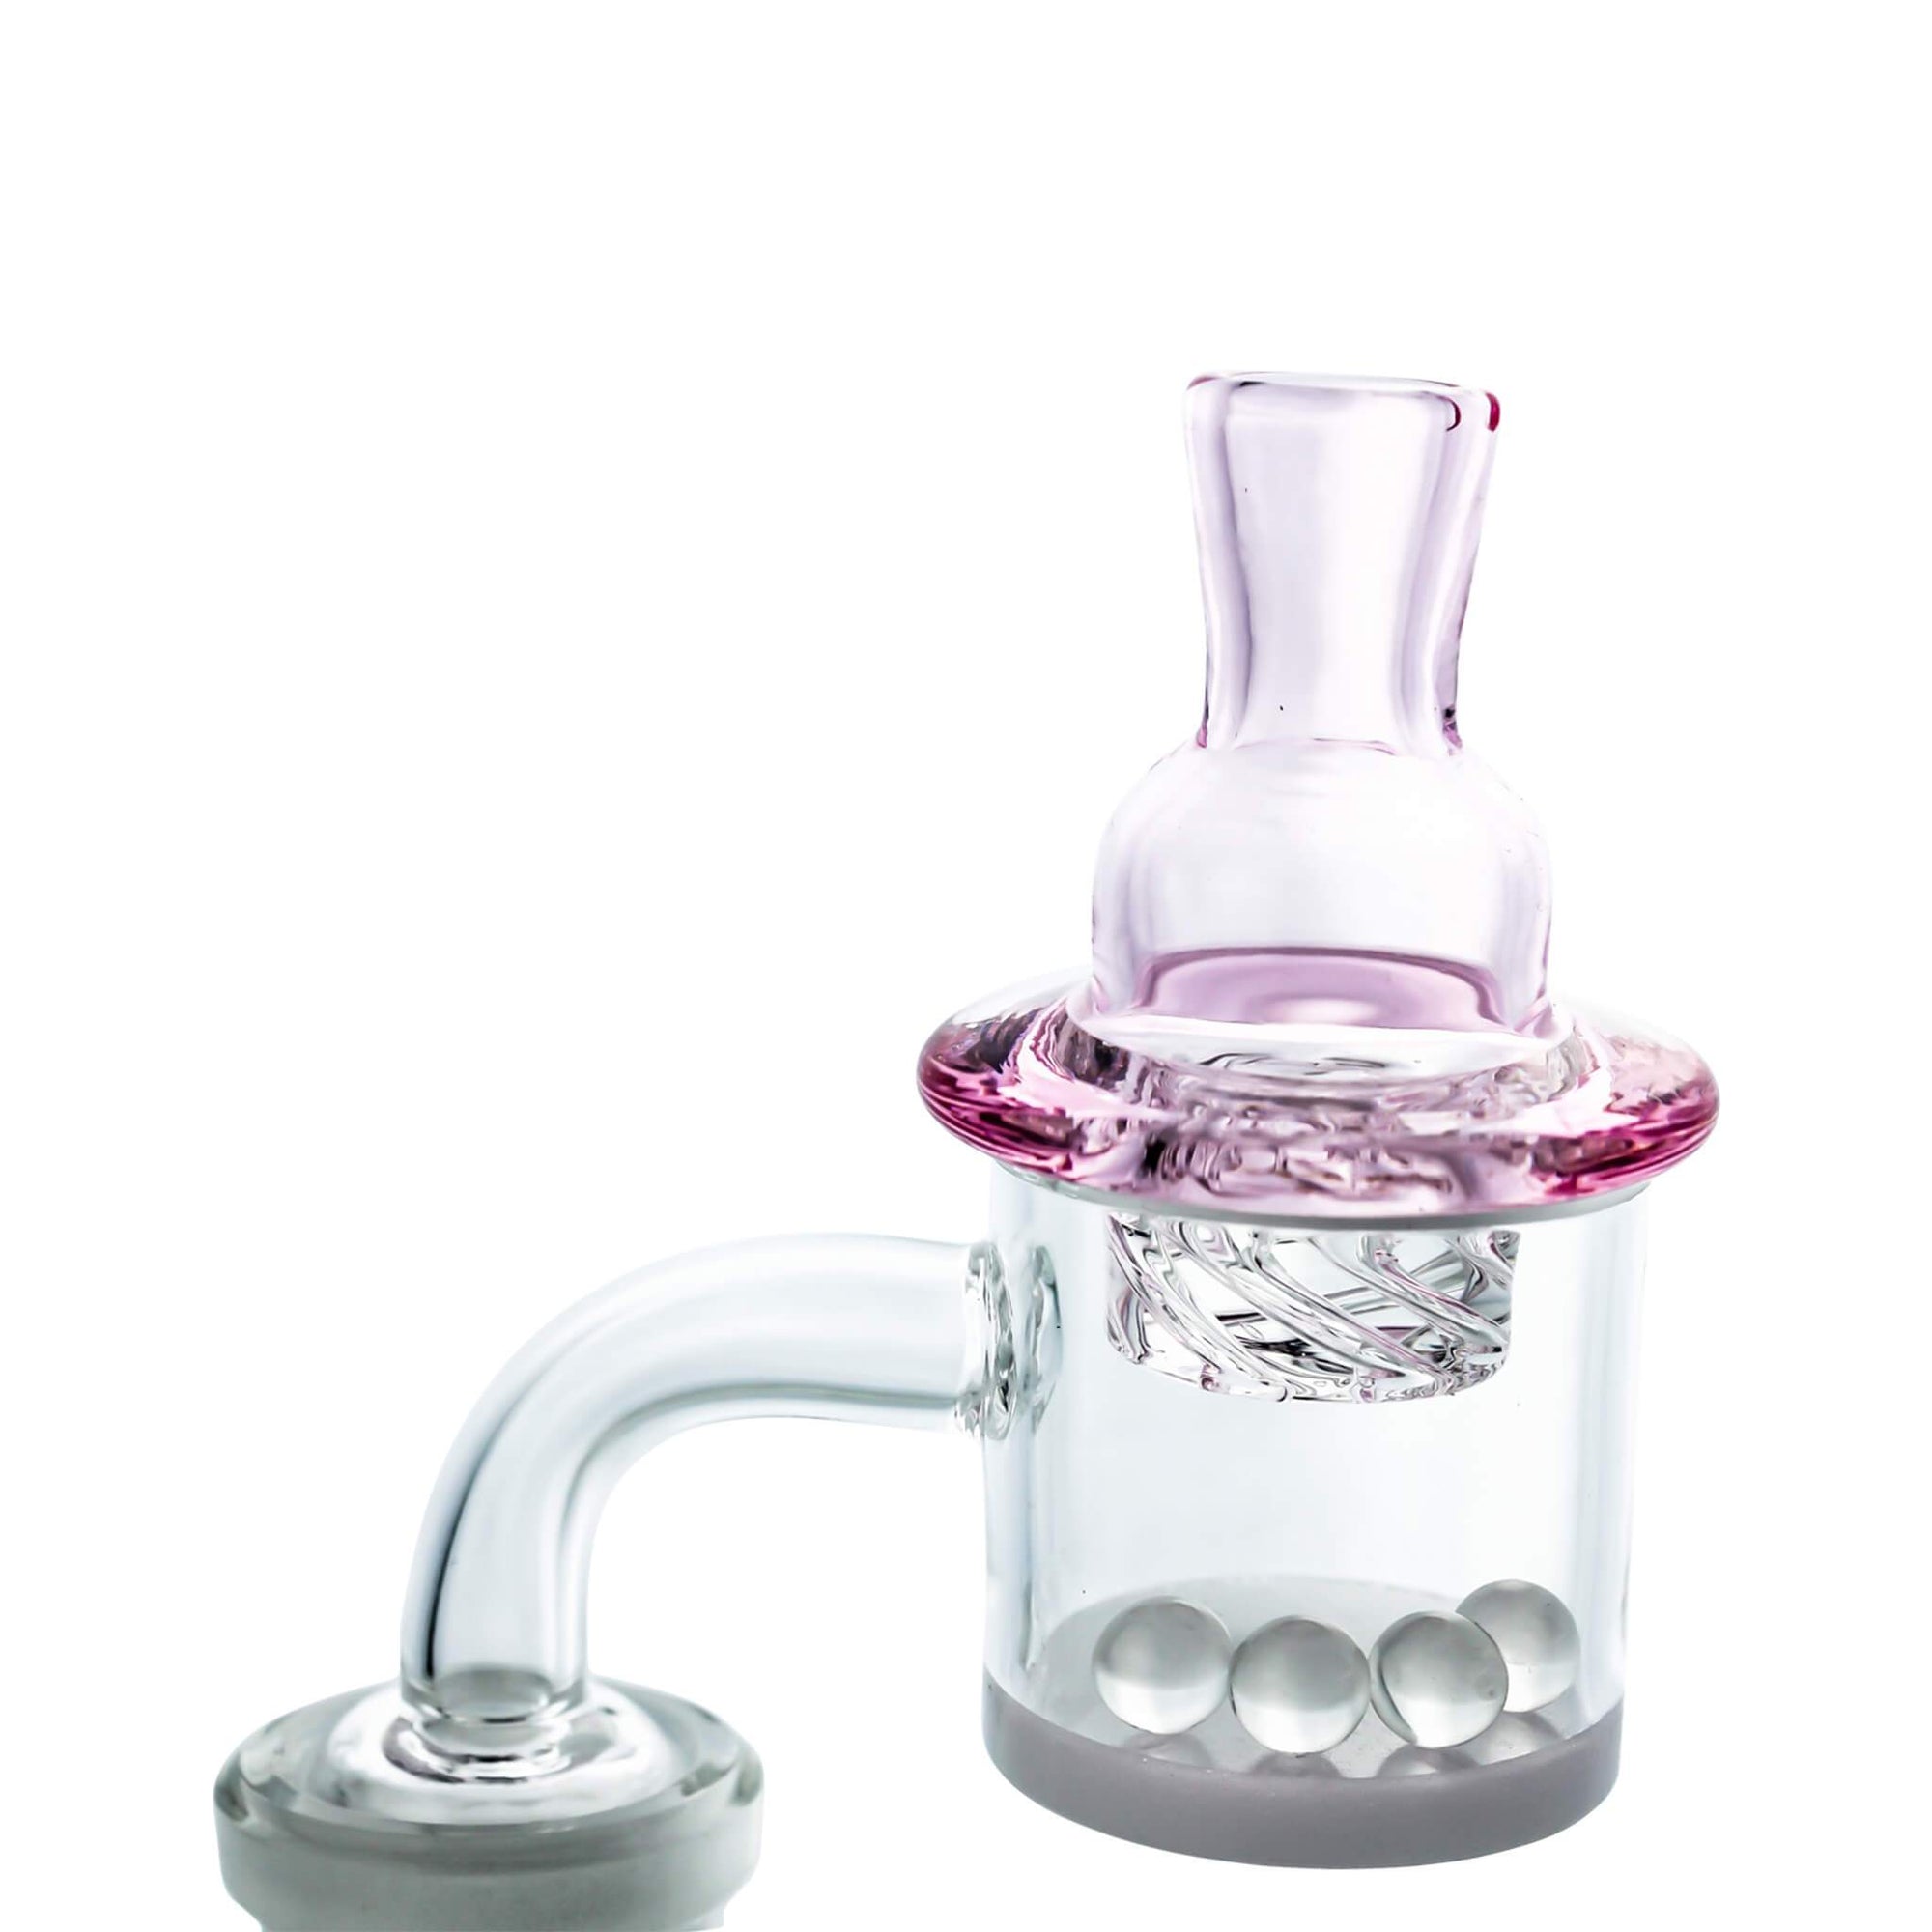 Terp Pearls, Mega Cyclone Spinner Carb Cap, 30mm Quartz Banger Combo | Combo Pack View-Pink | DW